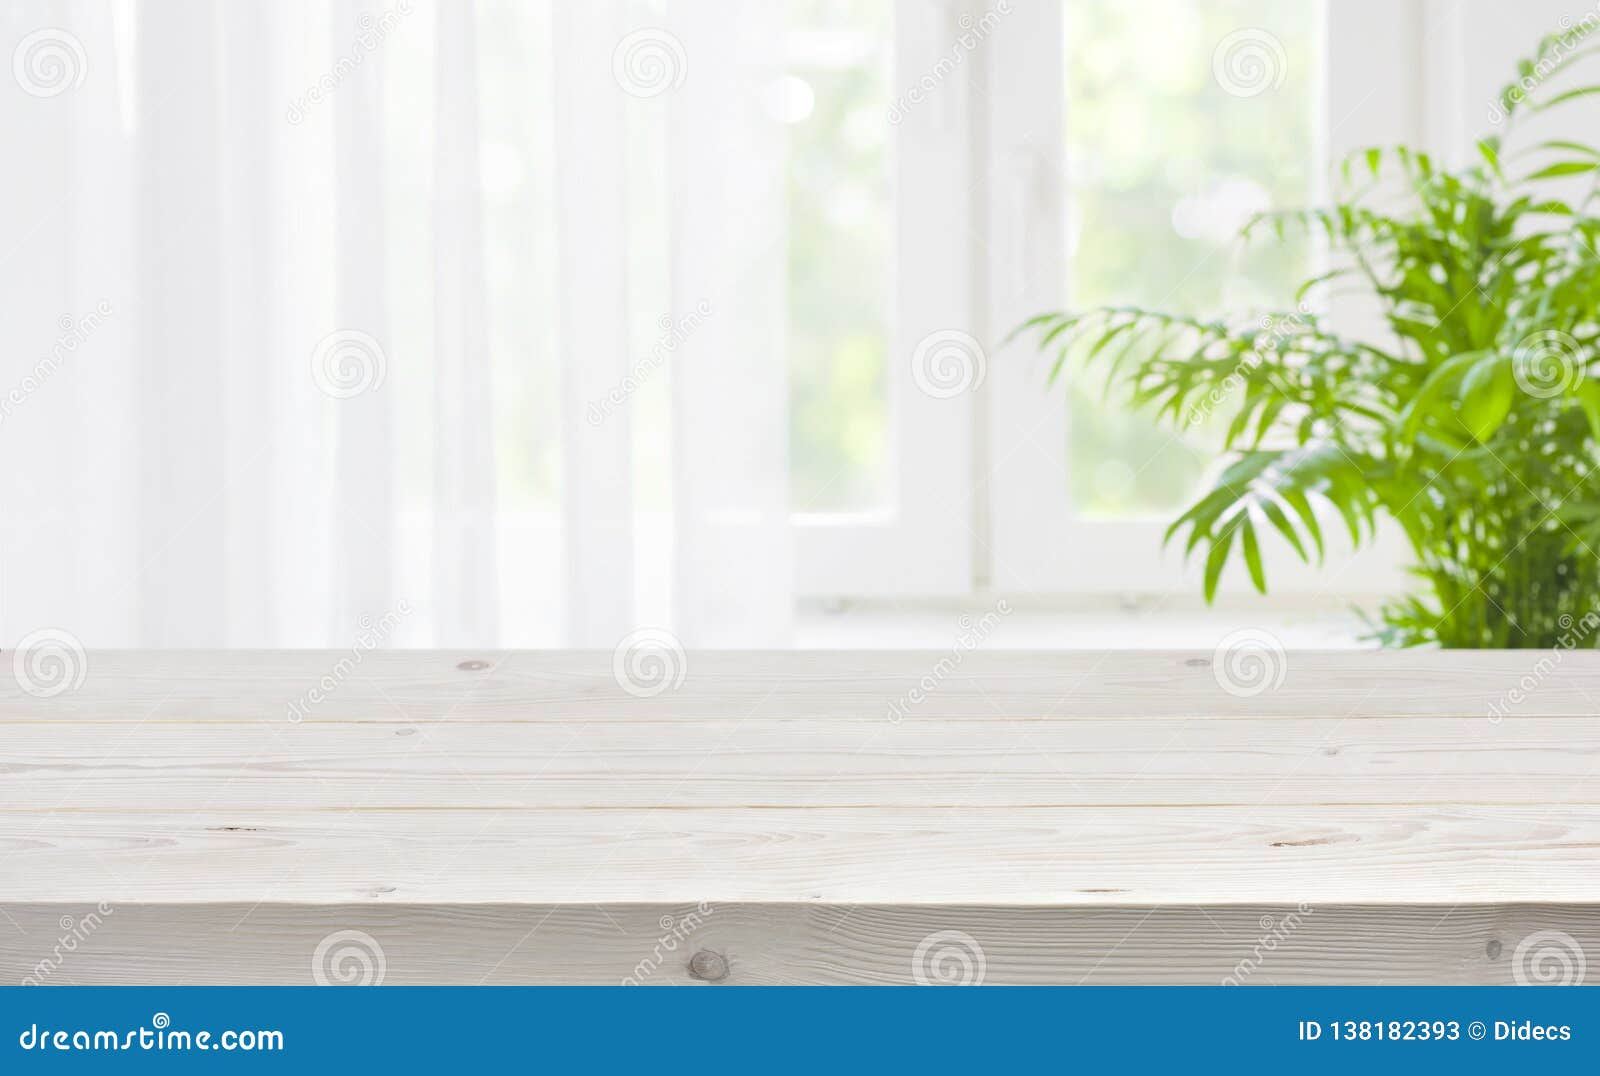 wood table top on blurred background of window with curtain